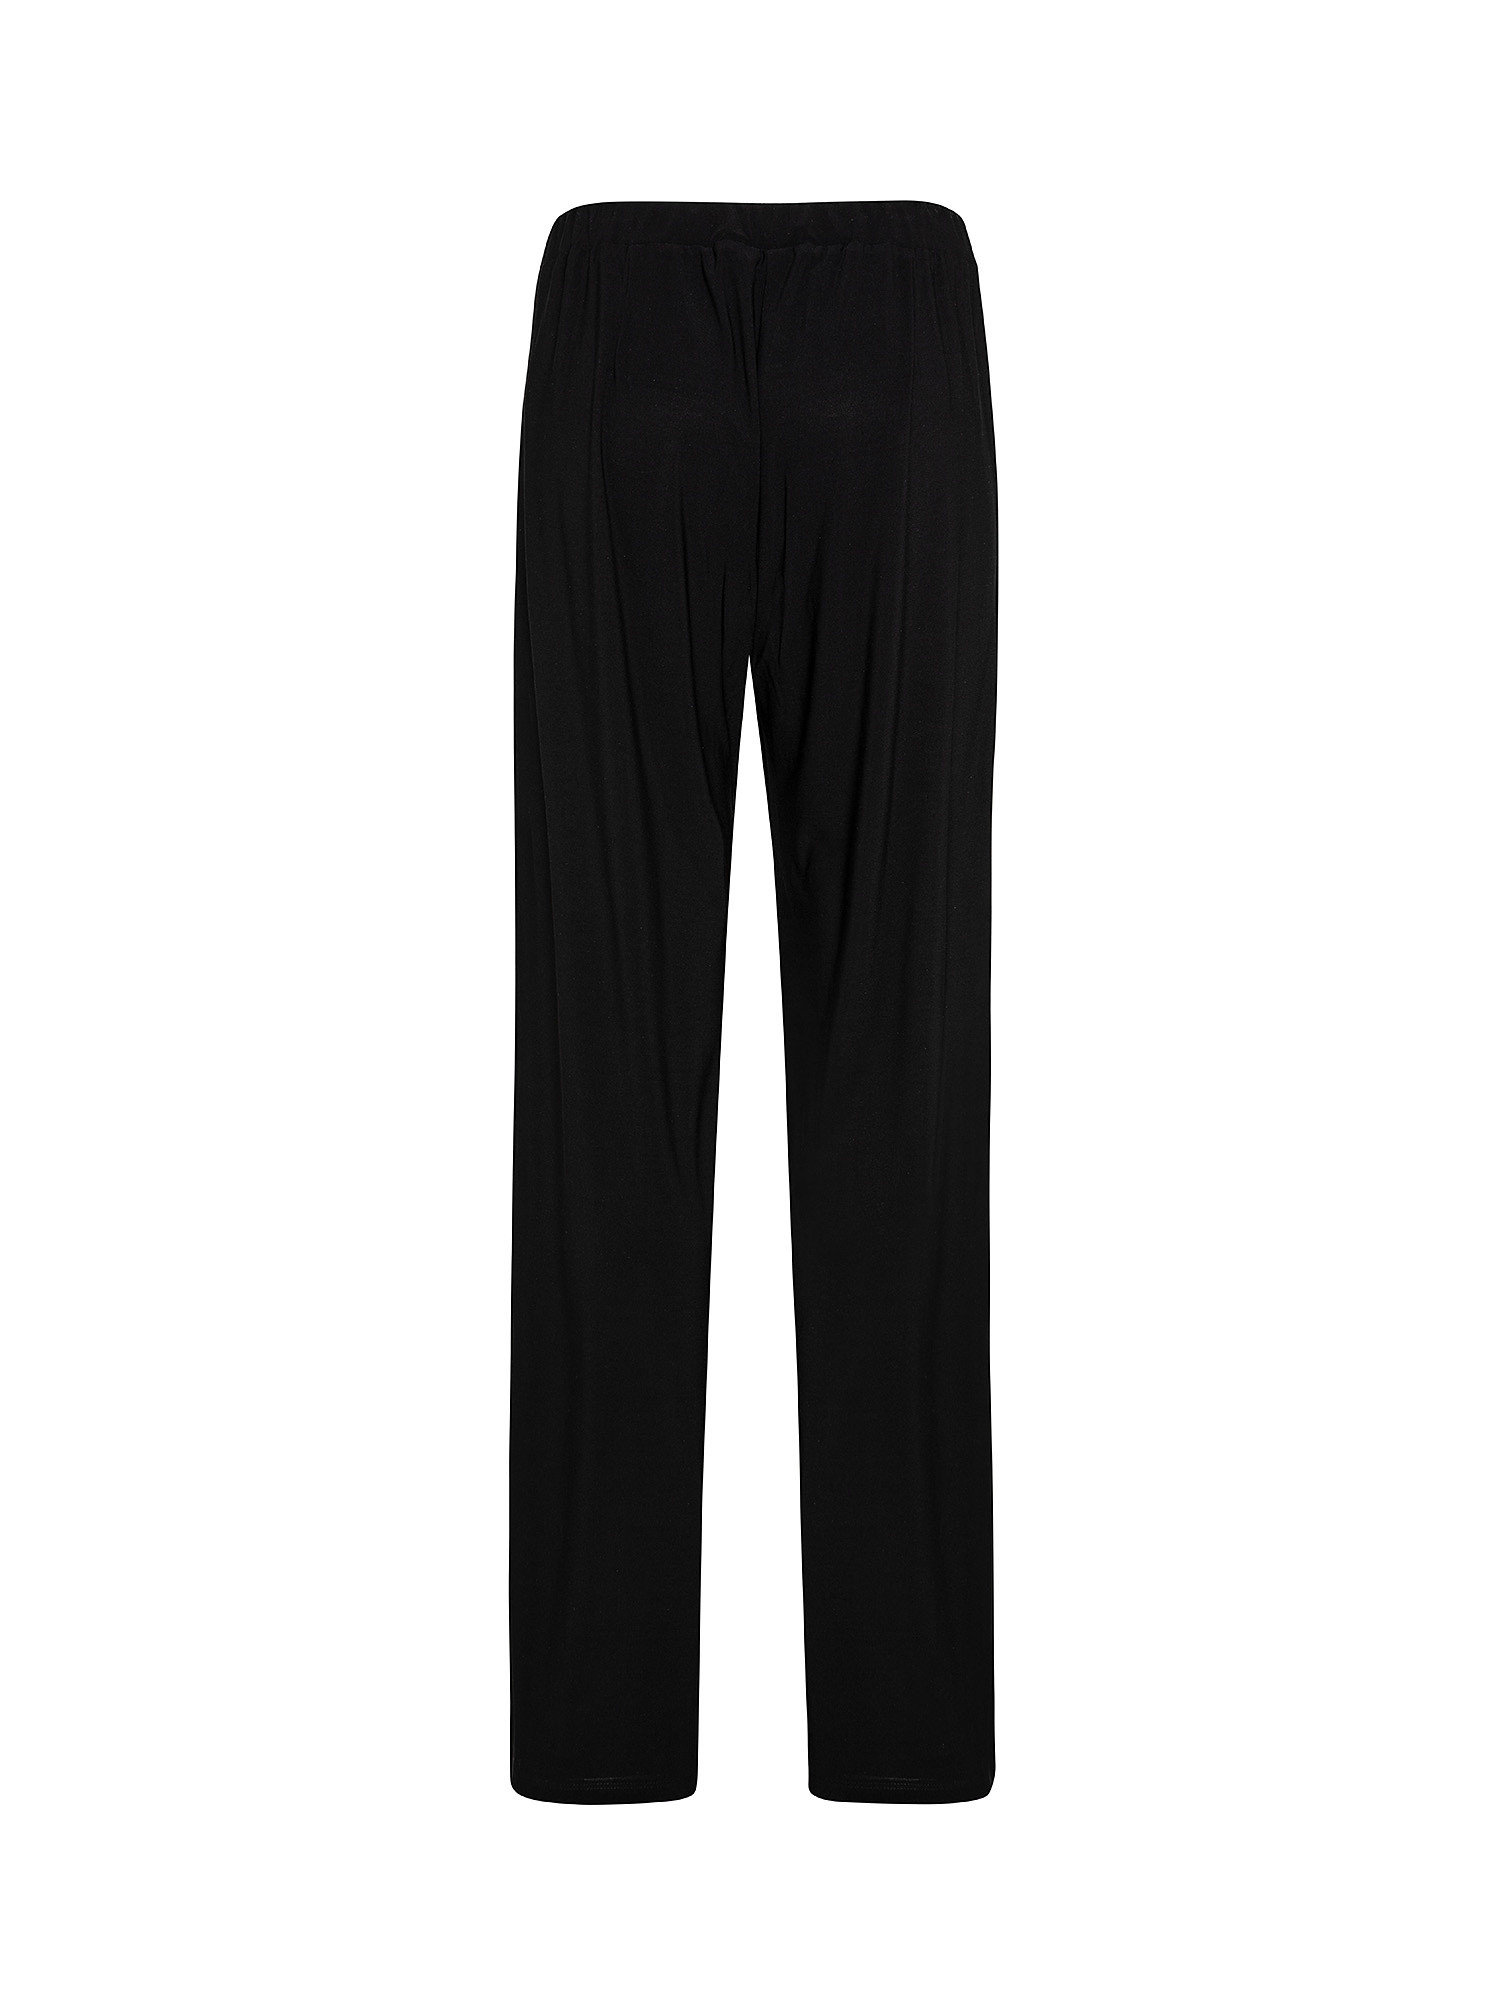 Wide leg trousers, Black, large image number 1